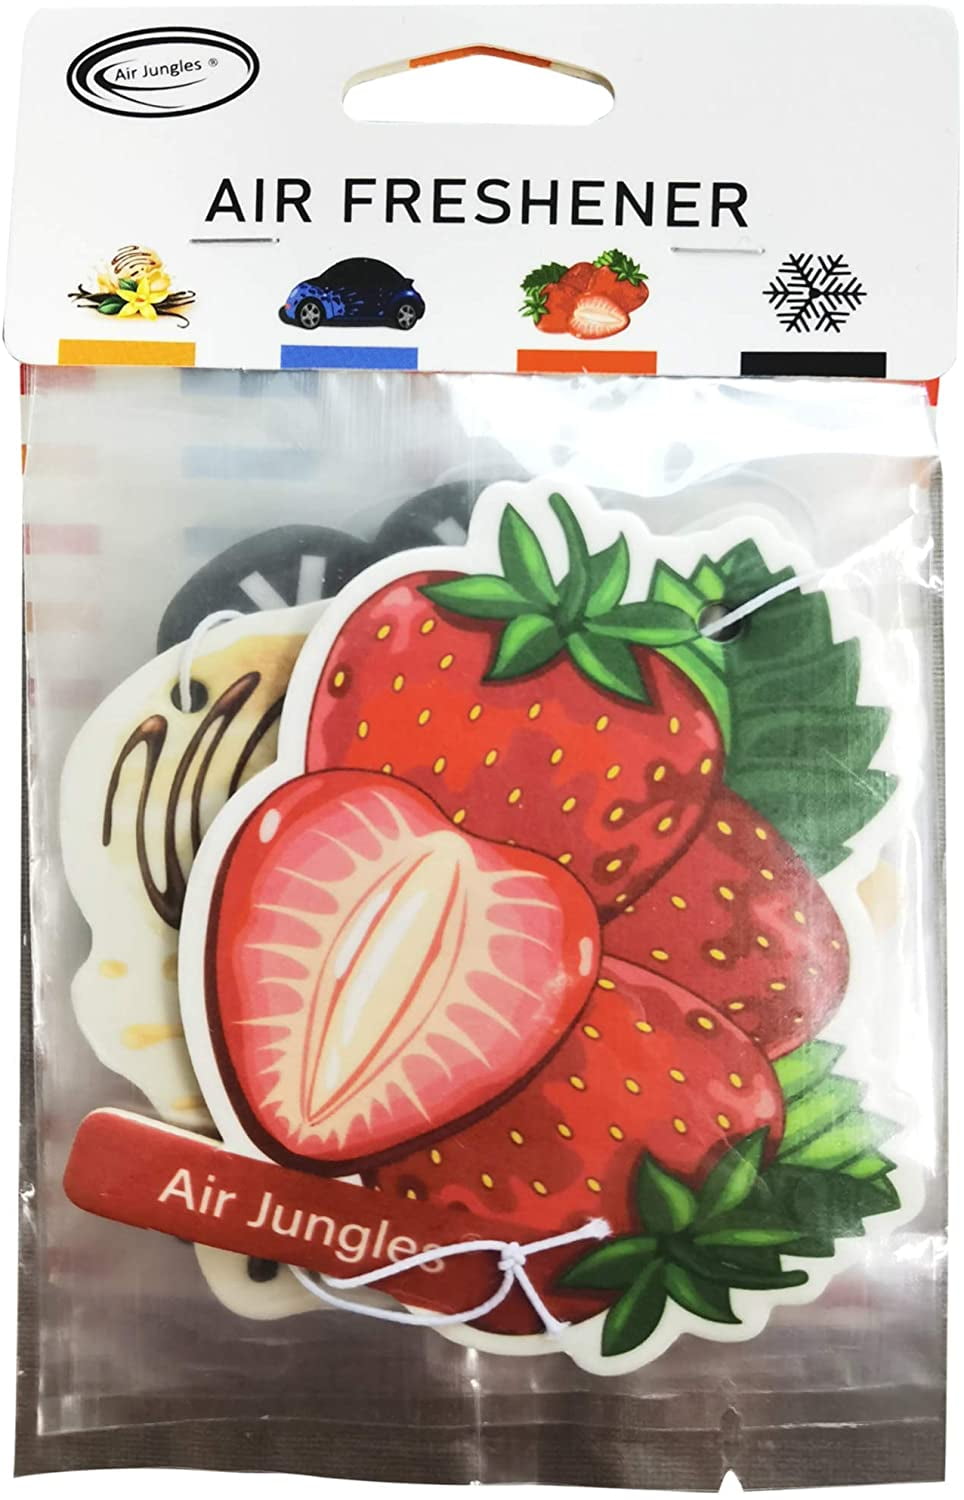 Air Jungles Car Air Fresheners Hanging 6 Count, Ice Jungle Car Scents Air  Freshener, Natural Essential Oil for Car Fragrance, Air Fresheners with  Odor